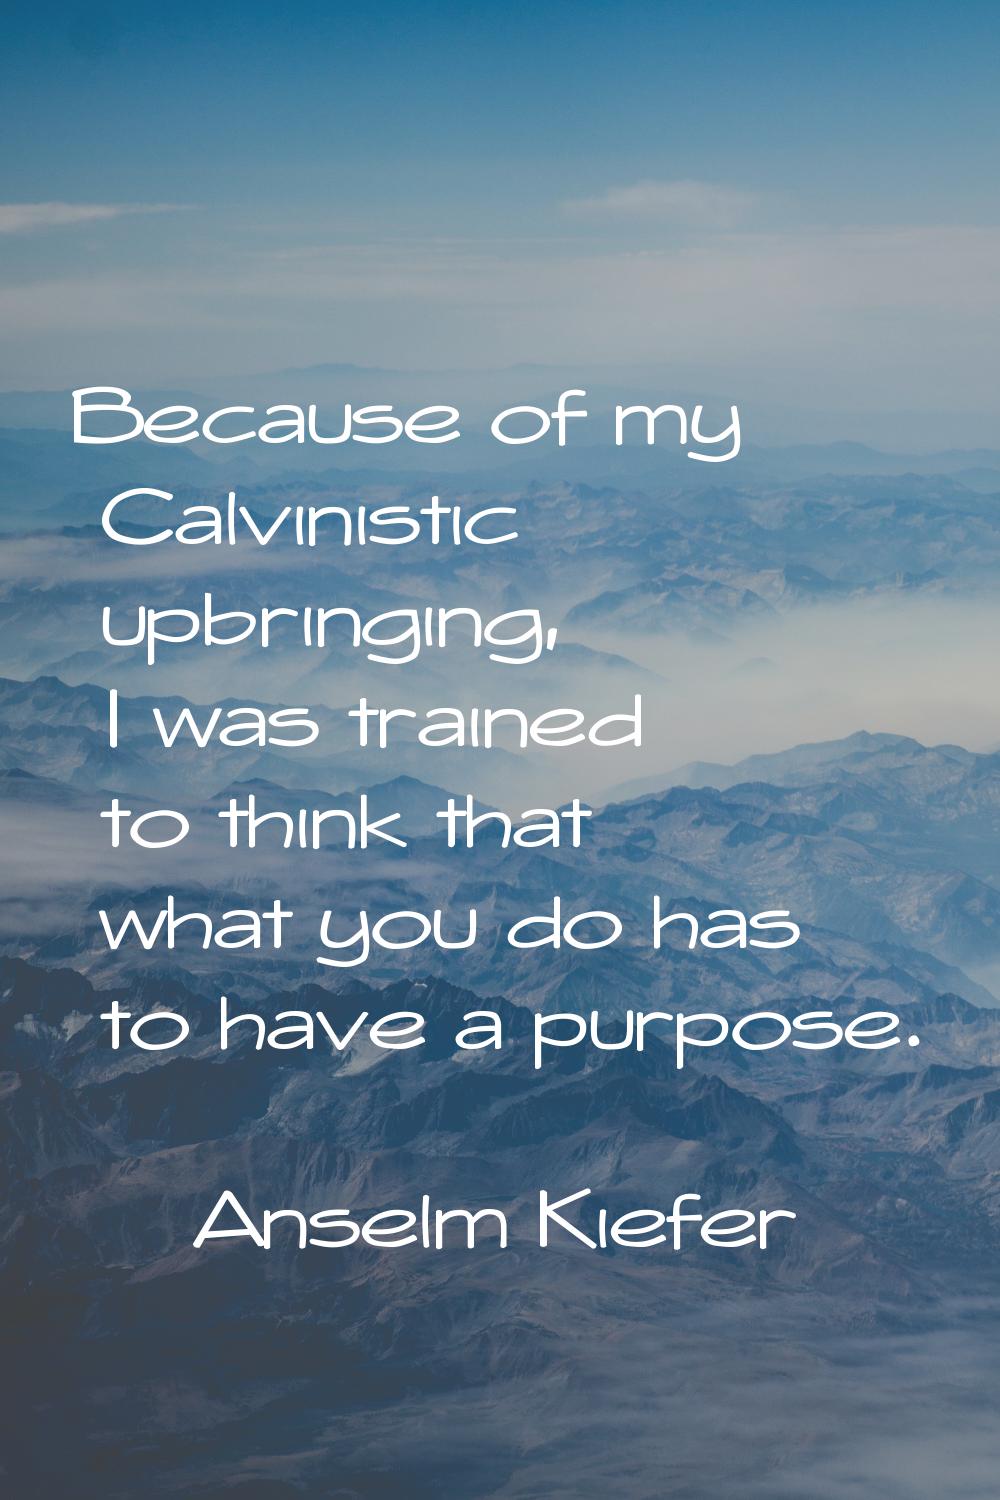 Because of my Calvinistic upbringing, I was trained to think that what you do has to have a purpose